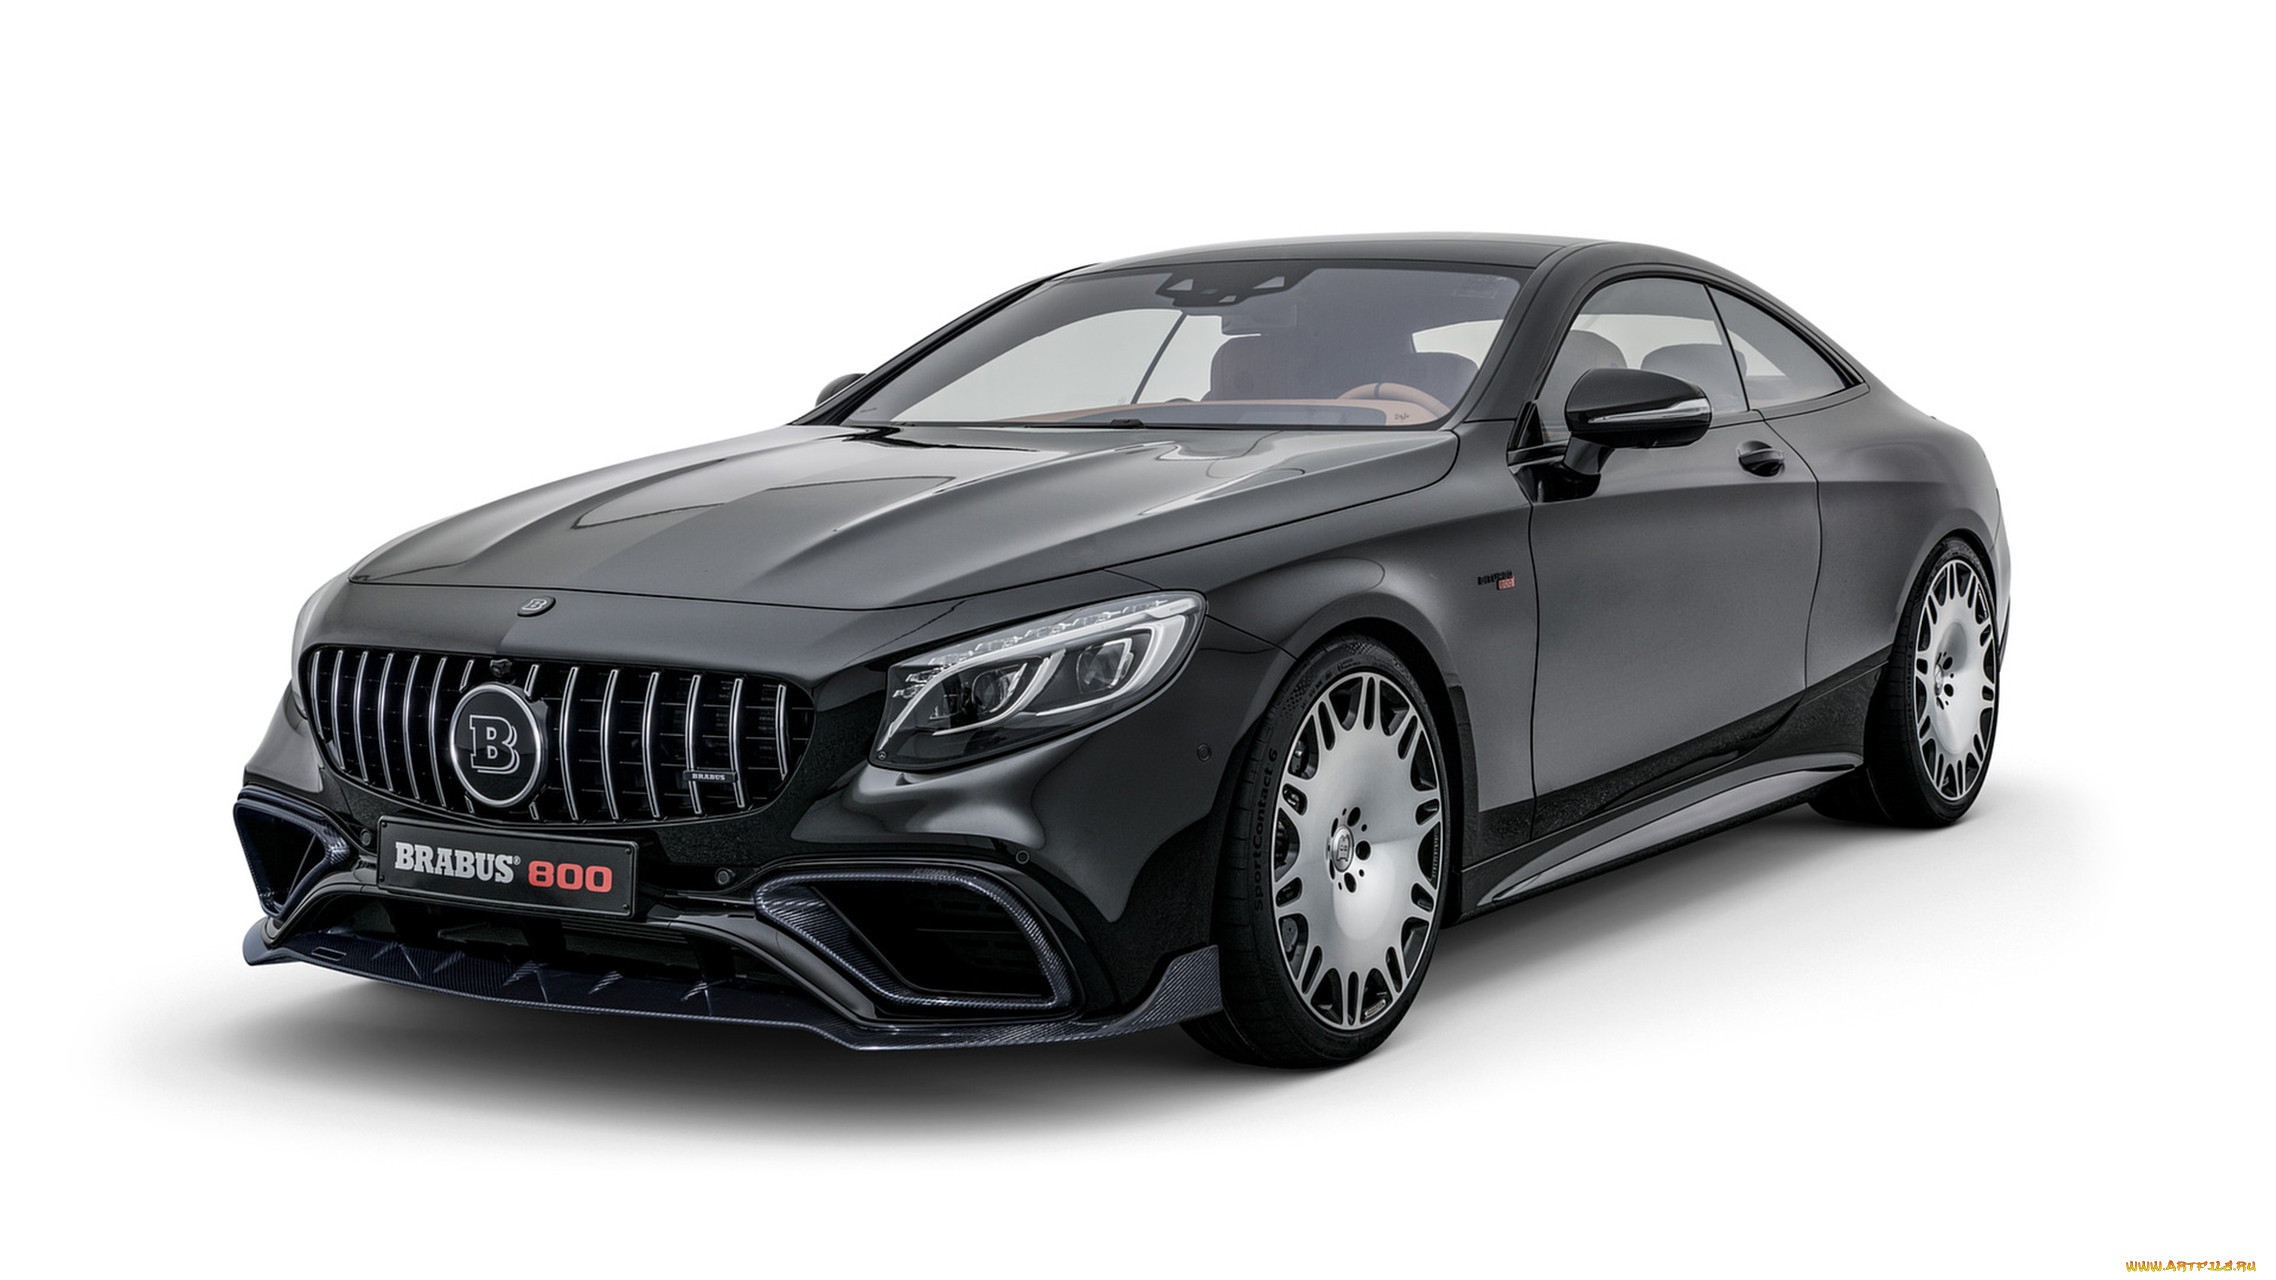 brabus 800 coupe based on mercedes-benz amg s-63 4matic coupe 2018, , brabus, based, coupe, 800, 4matic, s-63, amg, mercedes-benz, 2018